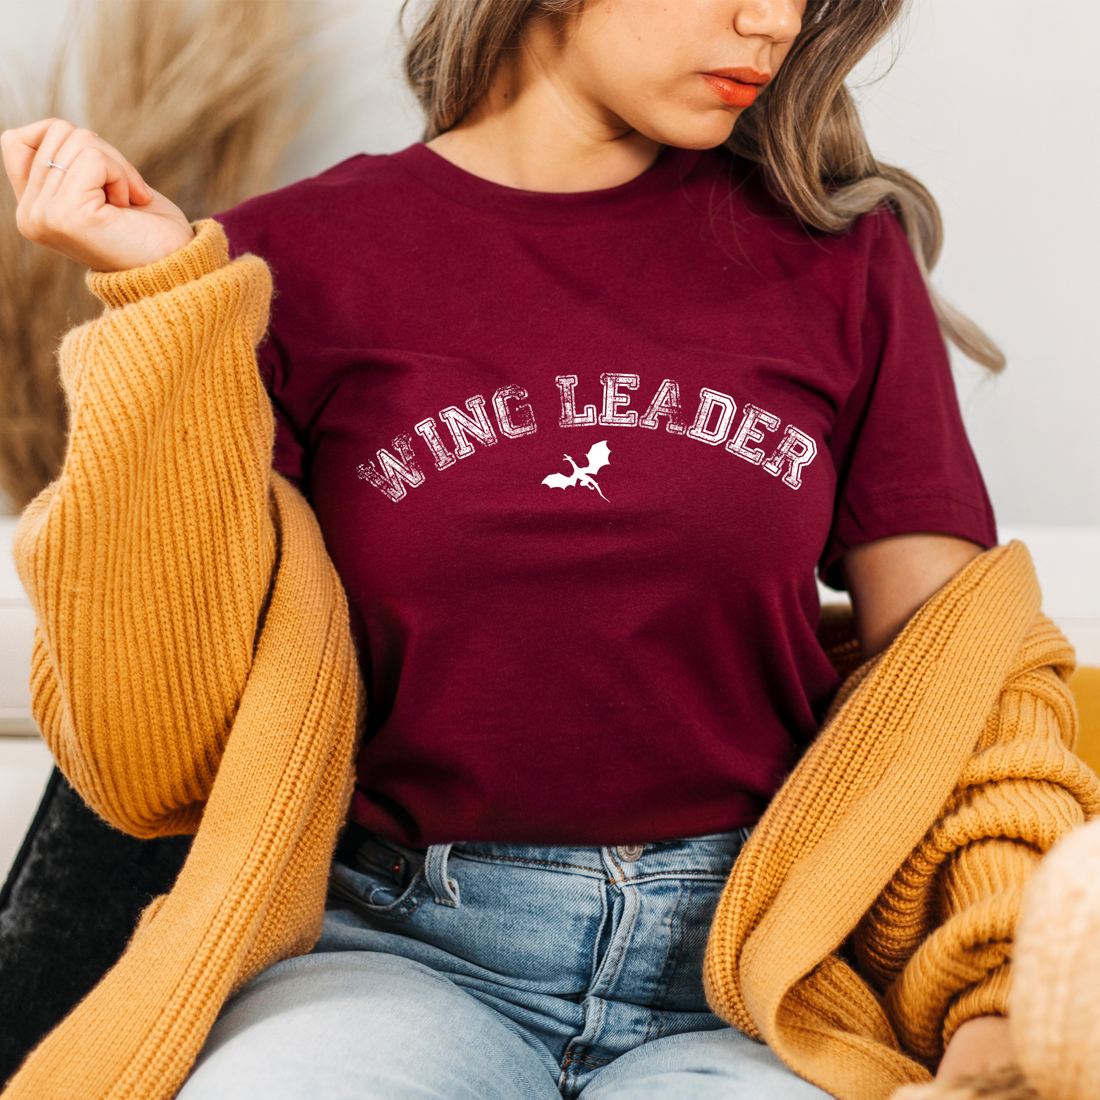 WING LEADER BOOKISH SHIRT | THRONE OF GLASS MERCH